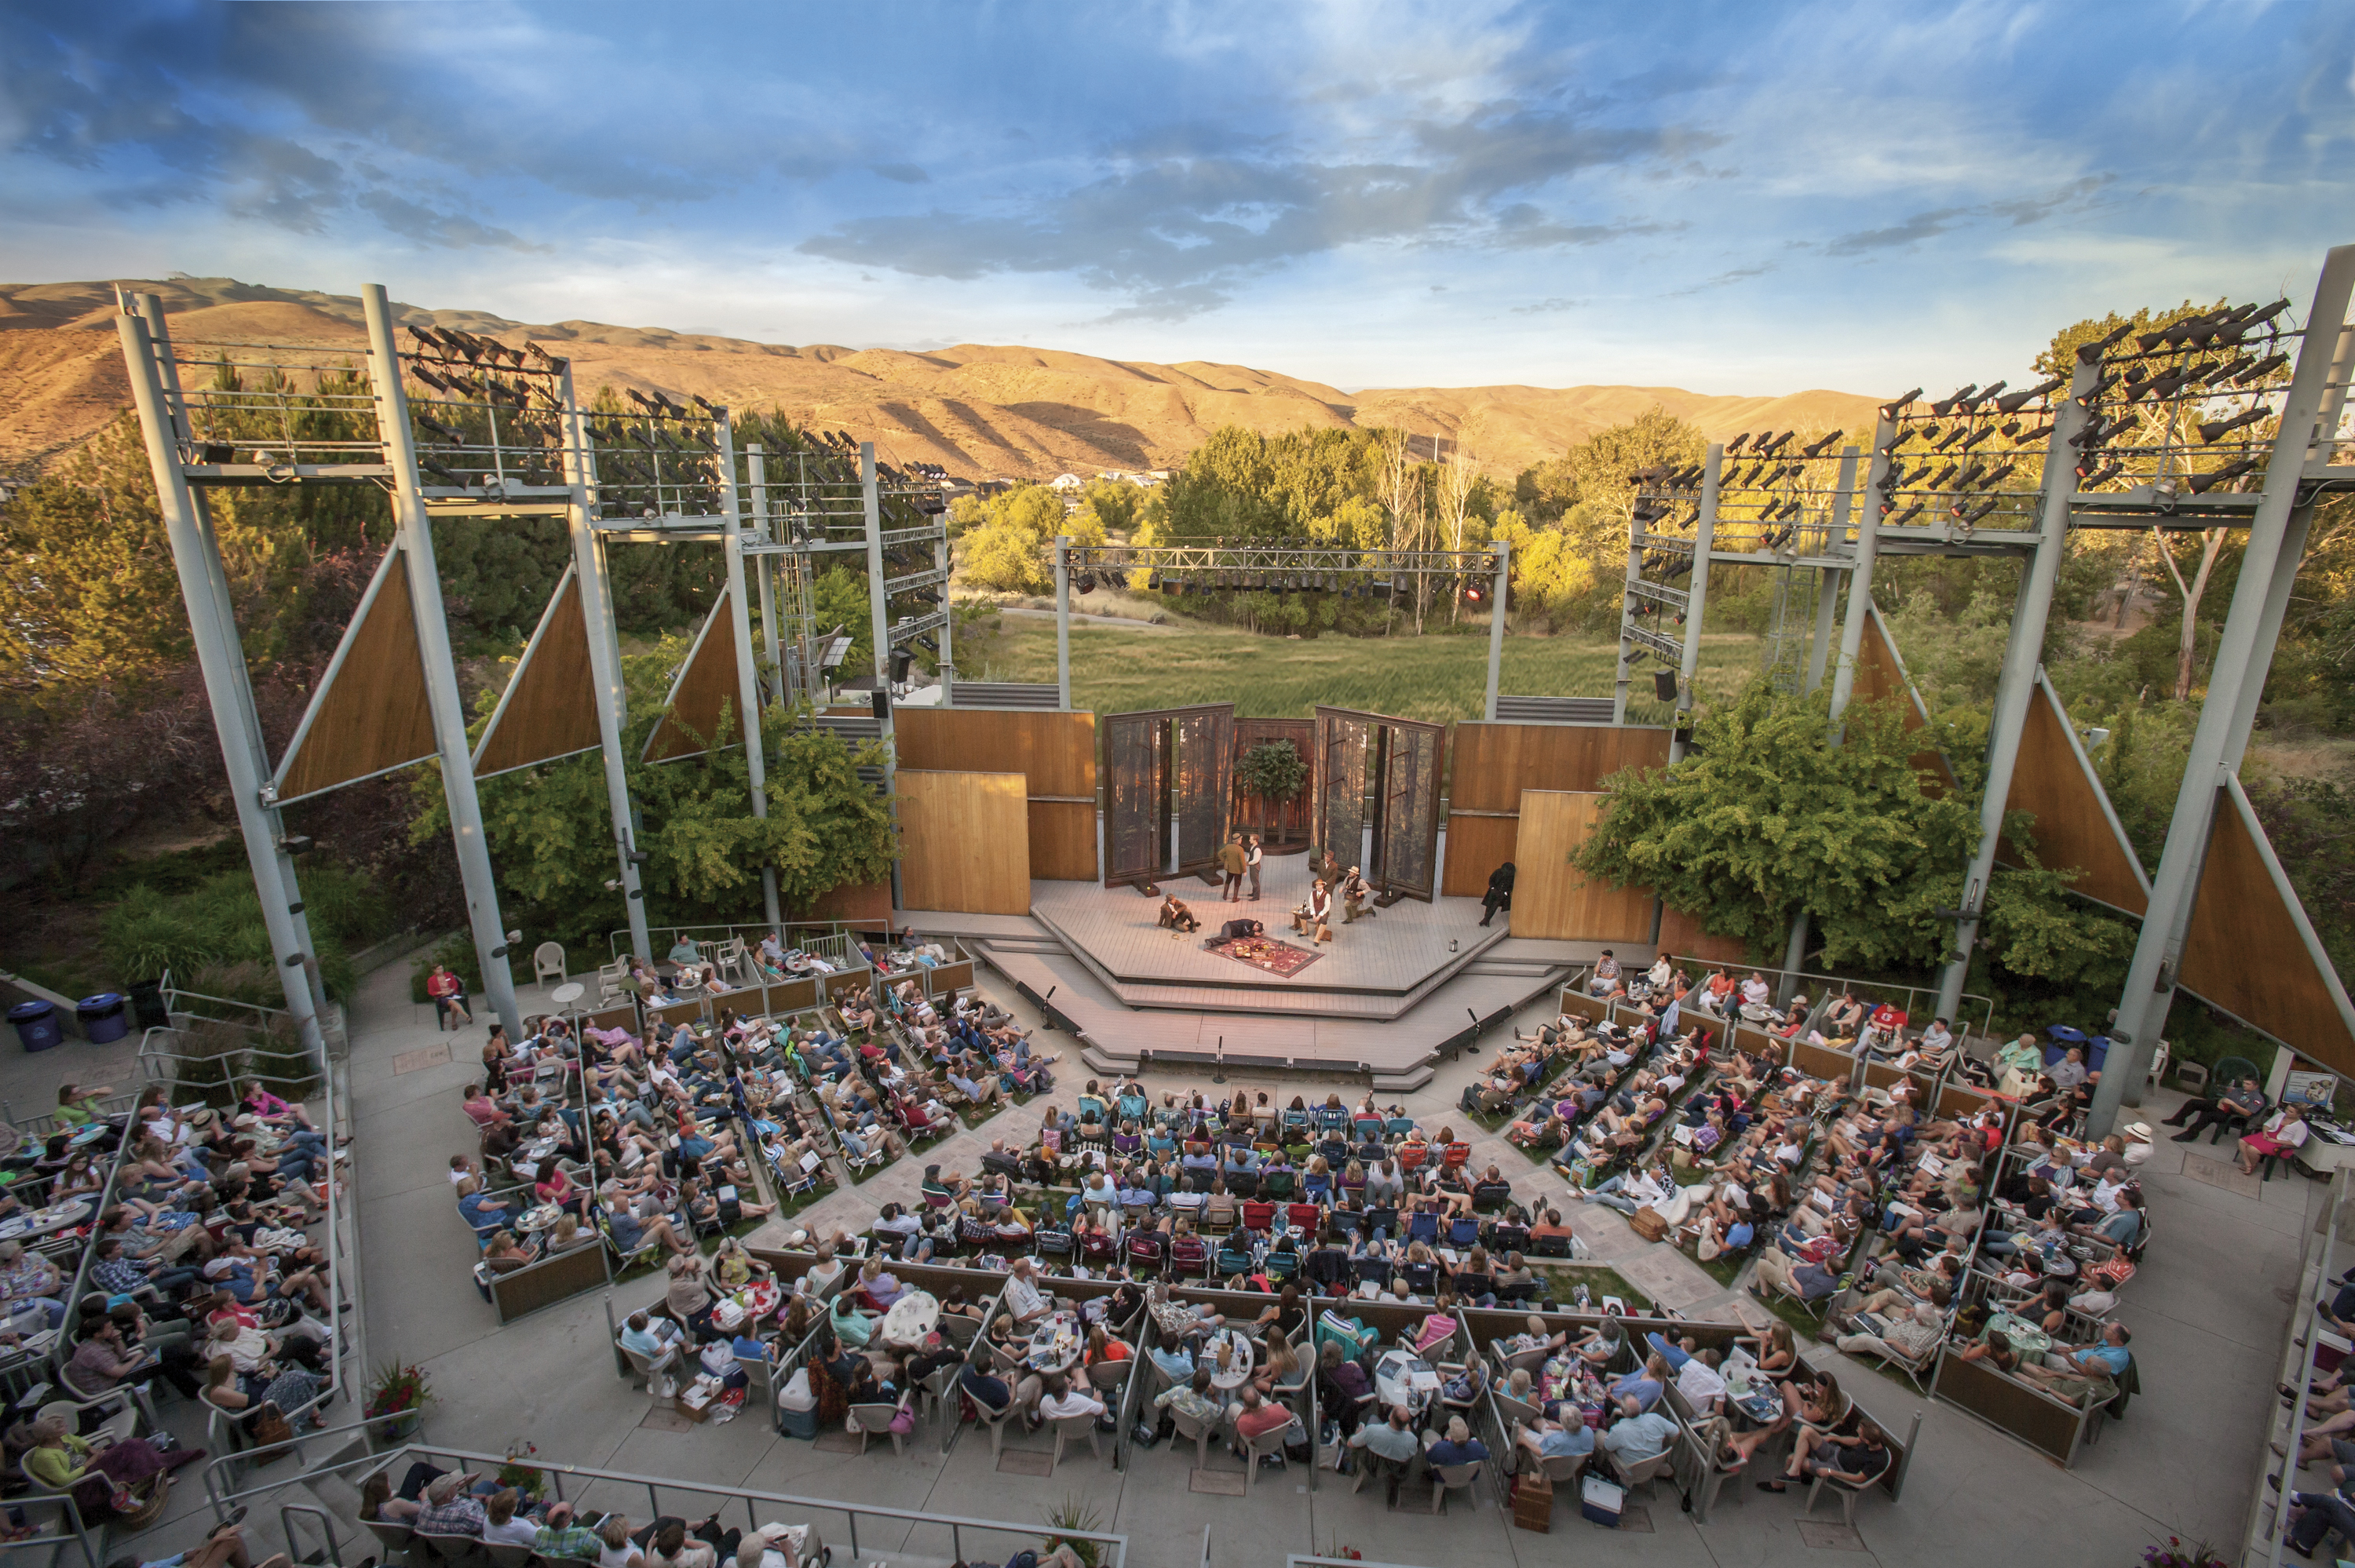 The stage and audience of the Idaho Shakespeare Festival, one of the largest performing arts organizations in Boise, ID